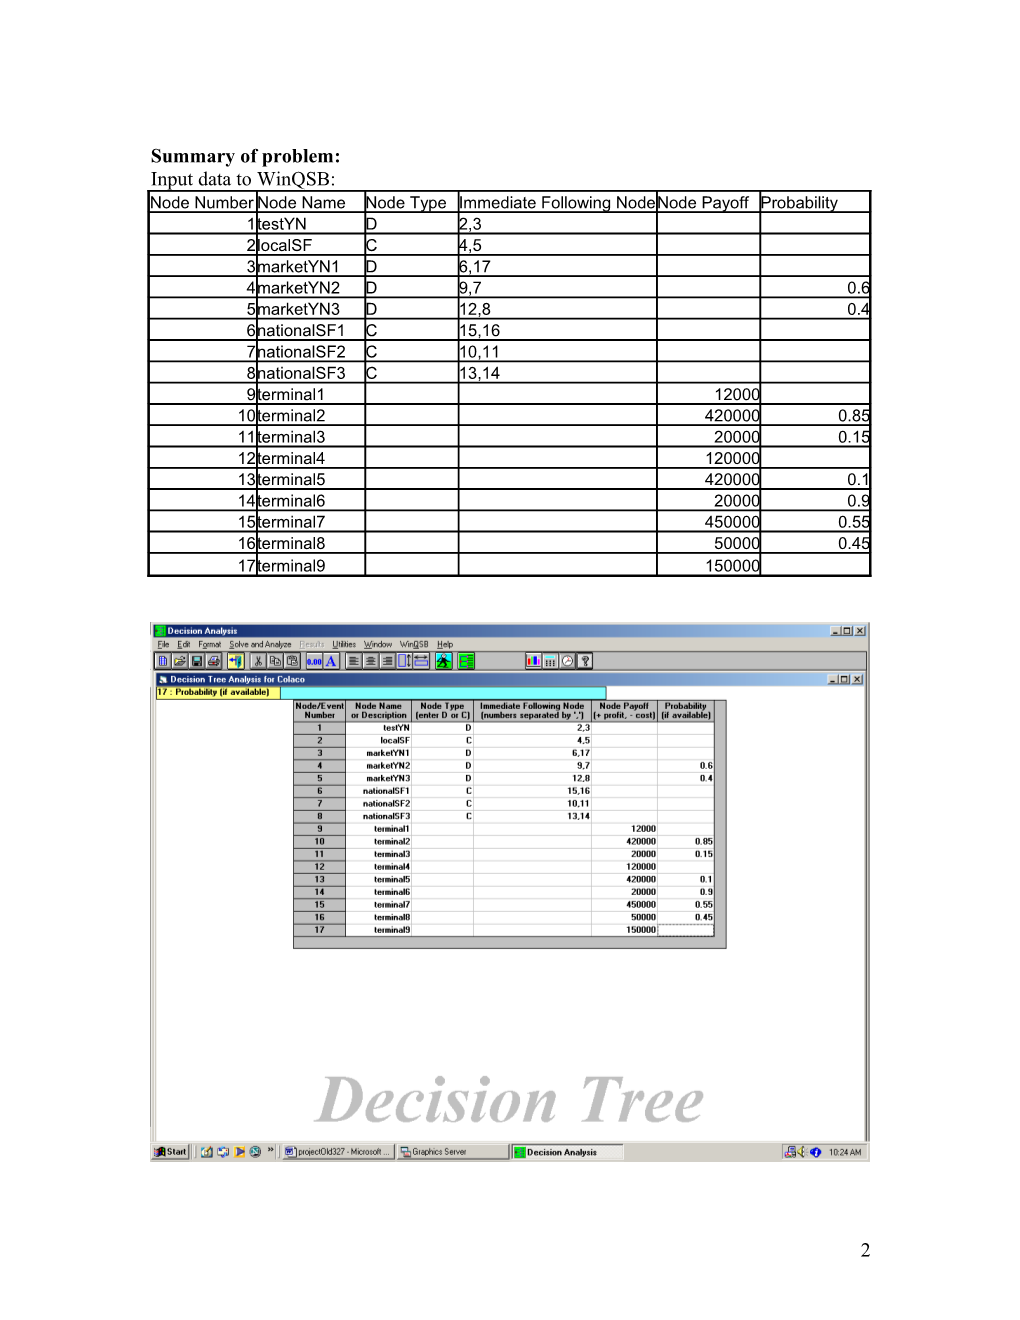 Colaco Soda Problem with Application of Winqsb for Decision Tree: Problem Statement and Solution